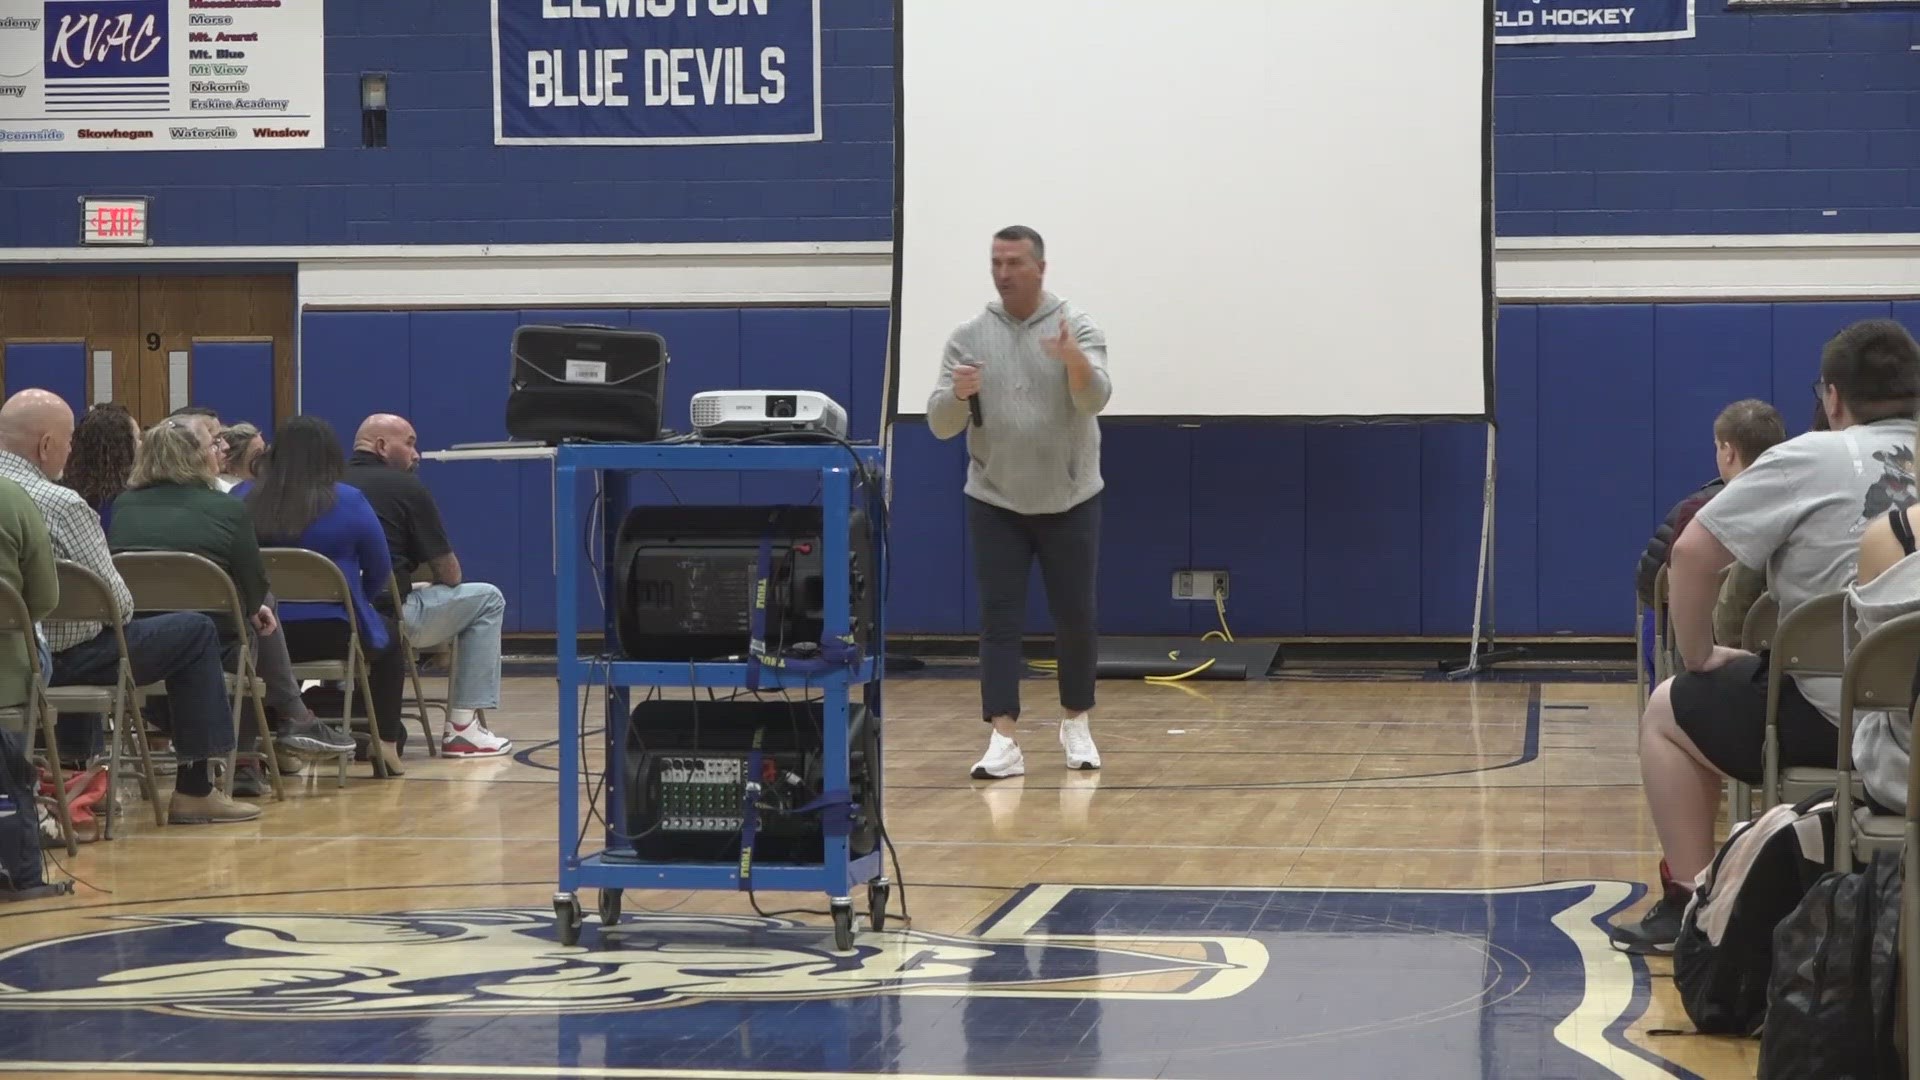 Former Boston Celtics player Chris Herren struggled with substance abuse issues. But he has since turned his life around and now speaks to inspire students.